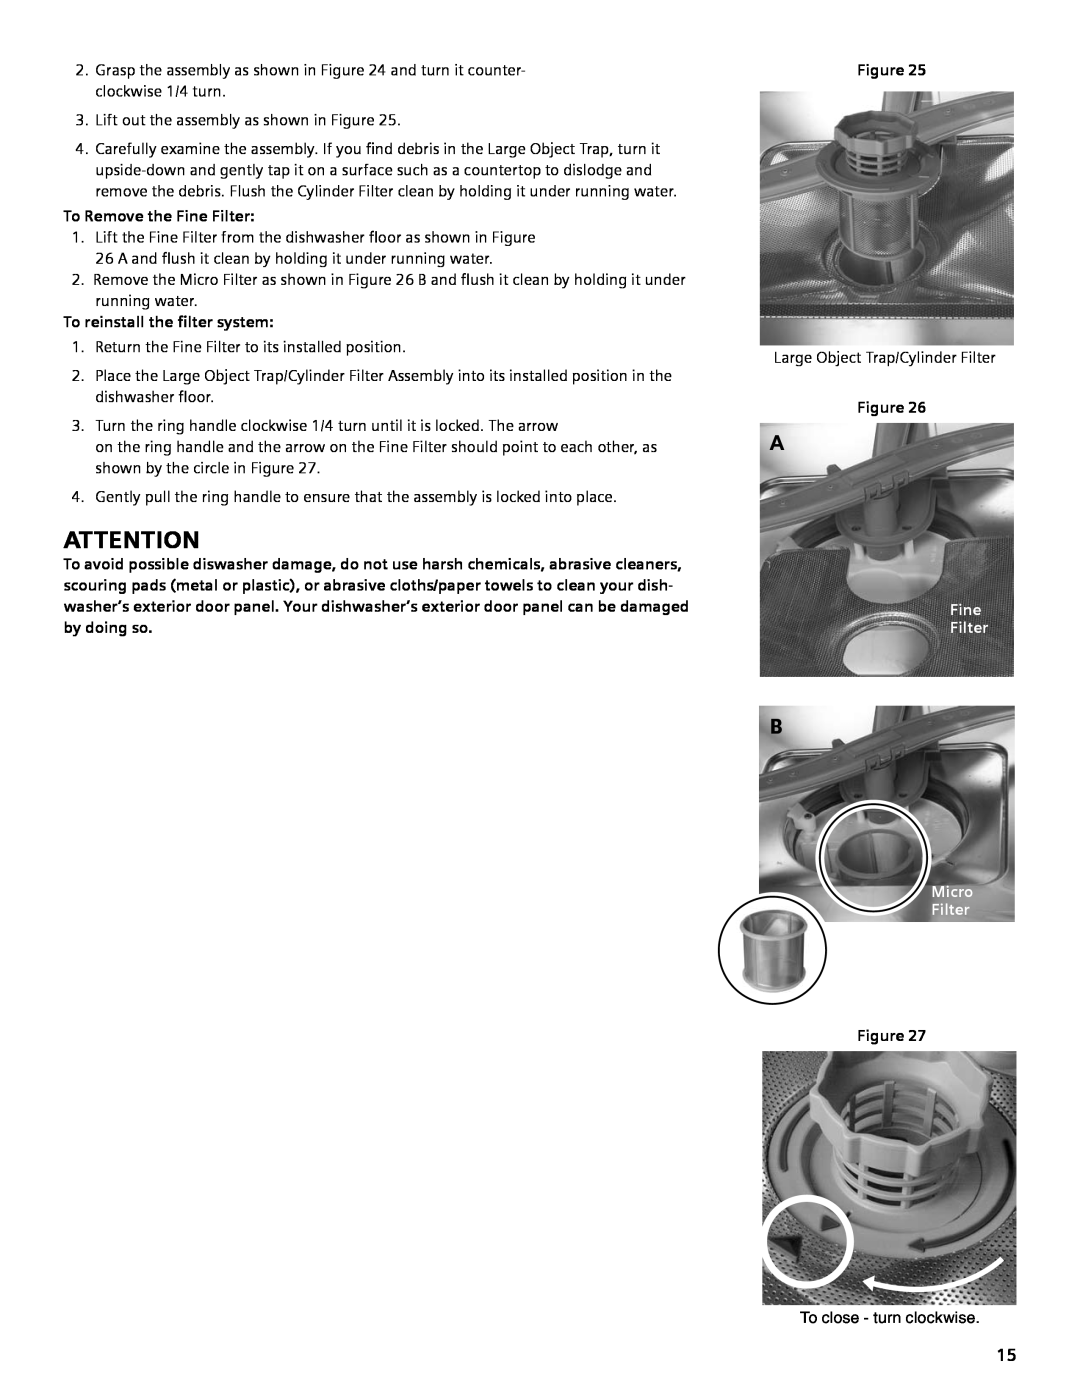 Bosch Appliances SGV45E03UC manual To Remove the Fine Filter, To reinstall the filter system, Micro Filter 